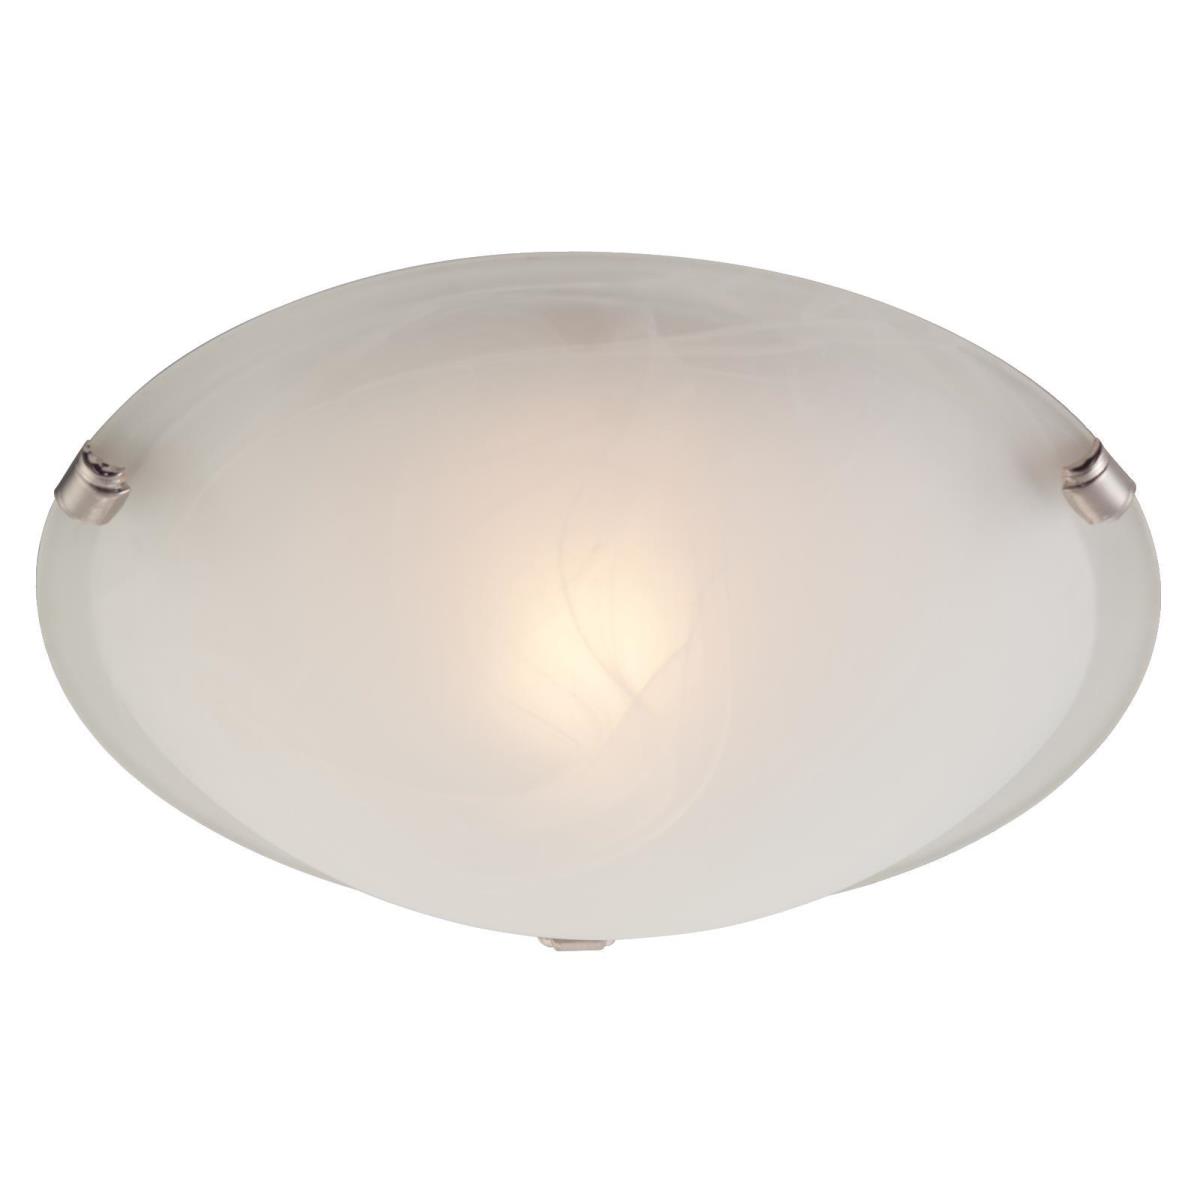 1 Light Flush White and Brushed Nickel Finish with White Alabaster Glass